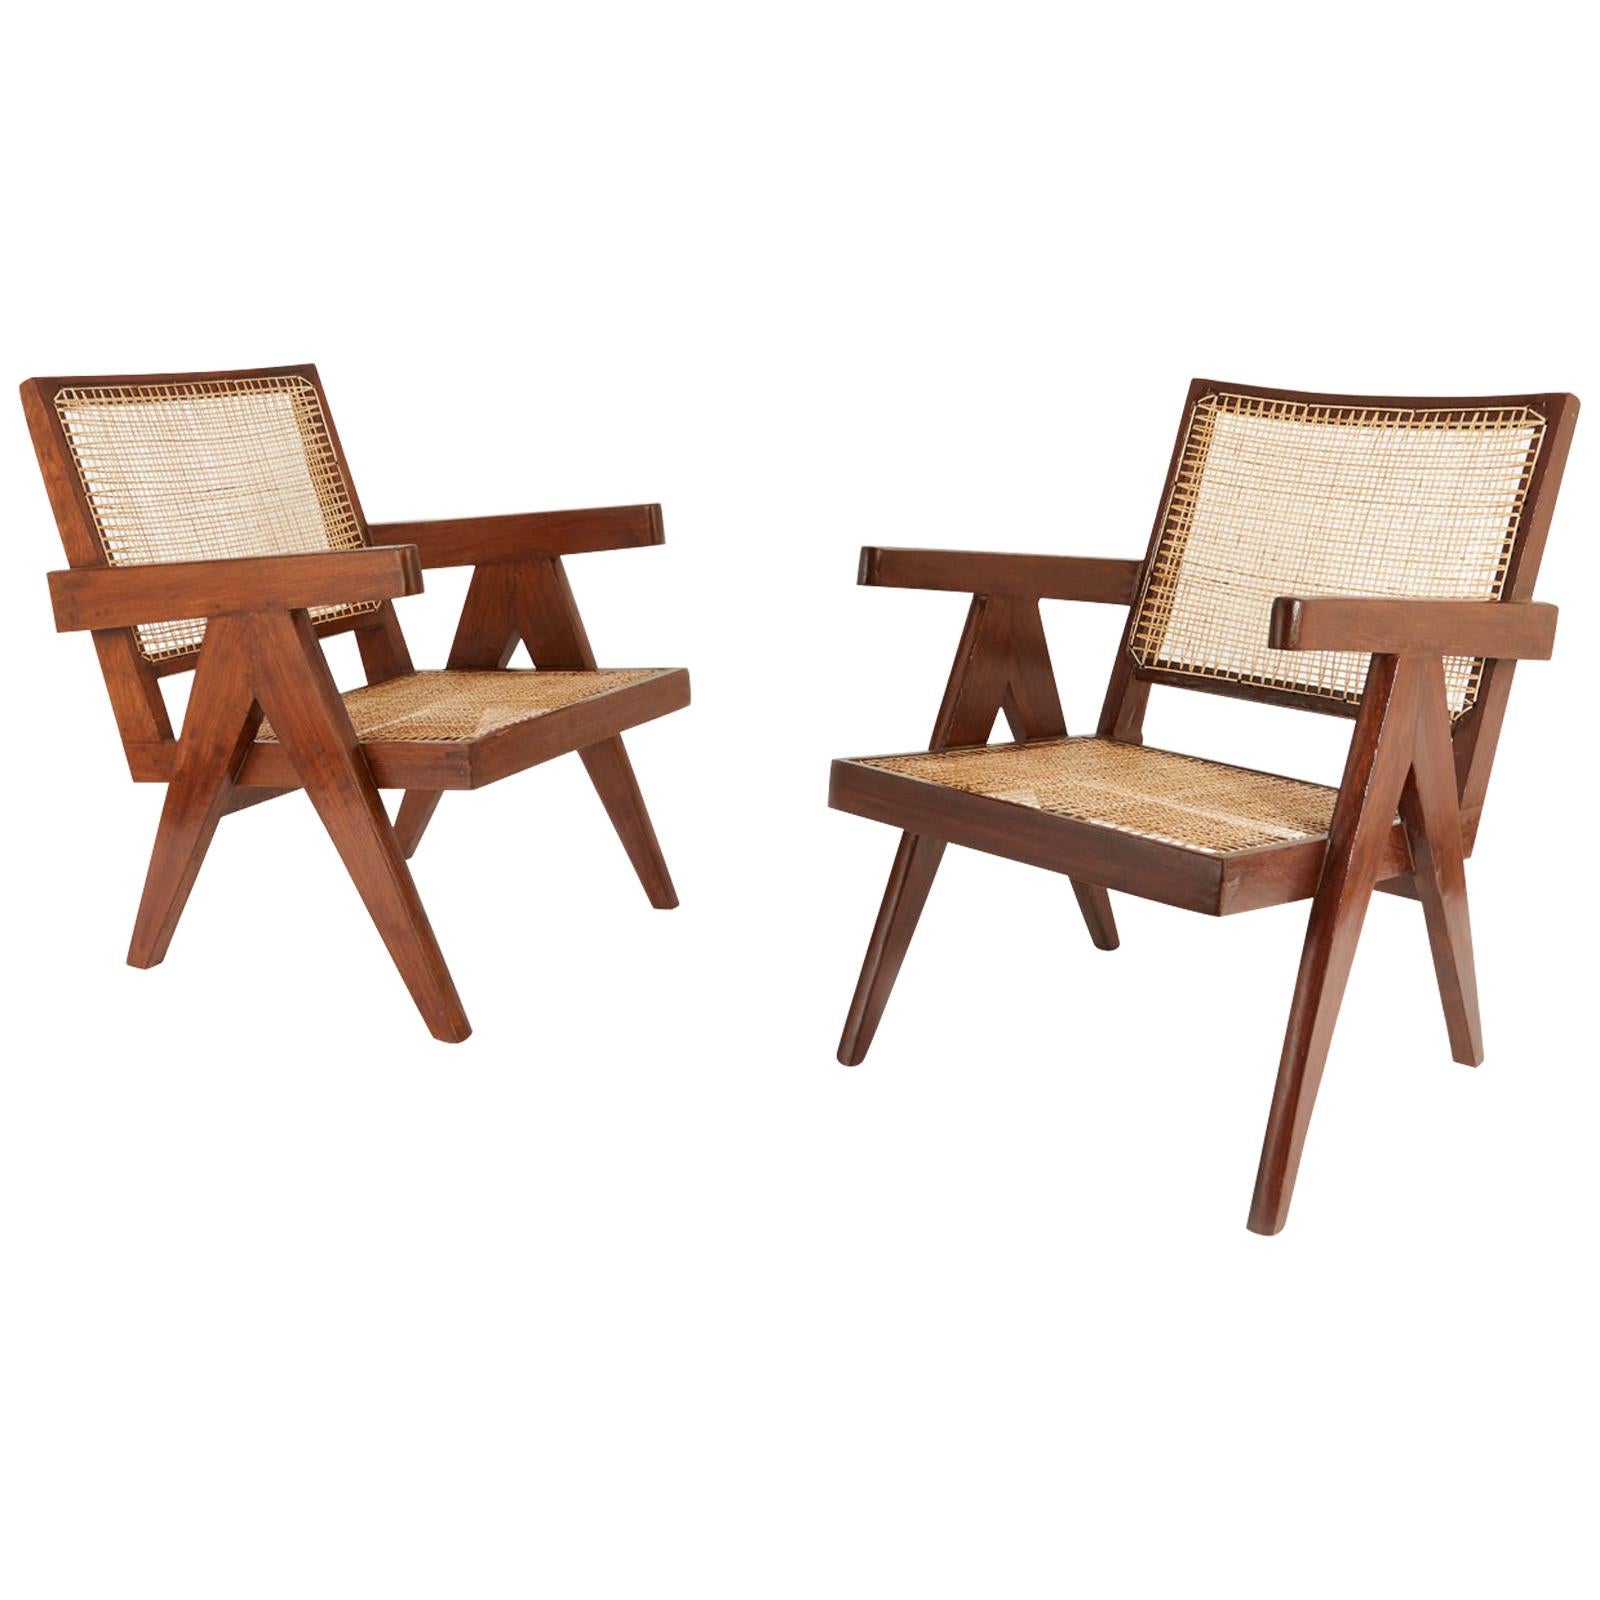 Pair of Pierre Jeanneret Easy Chairs